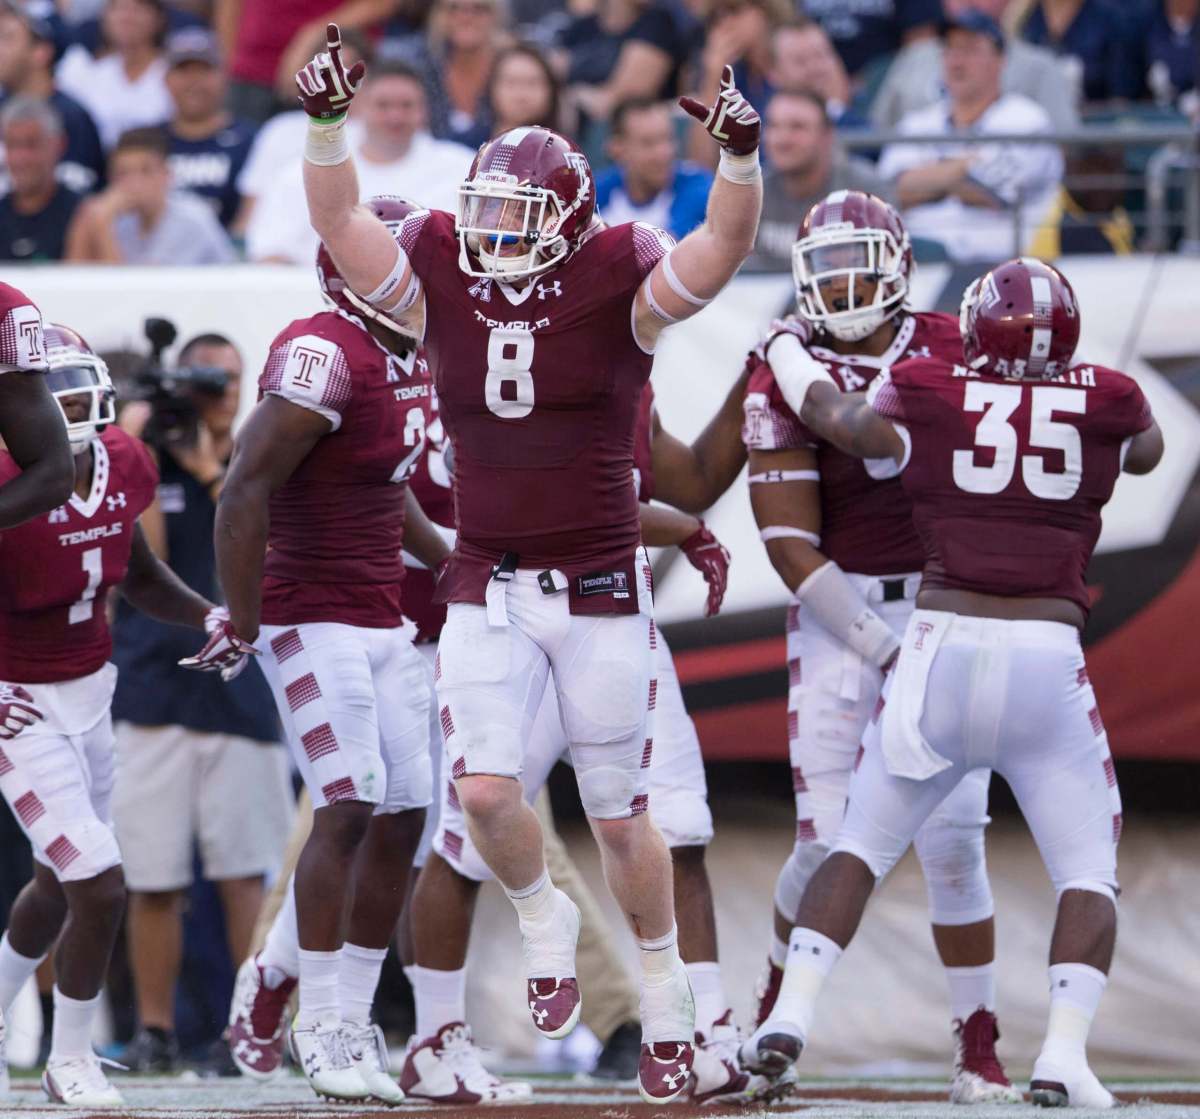 Temple to host Notre Dame in prime time on Halloween night